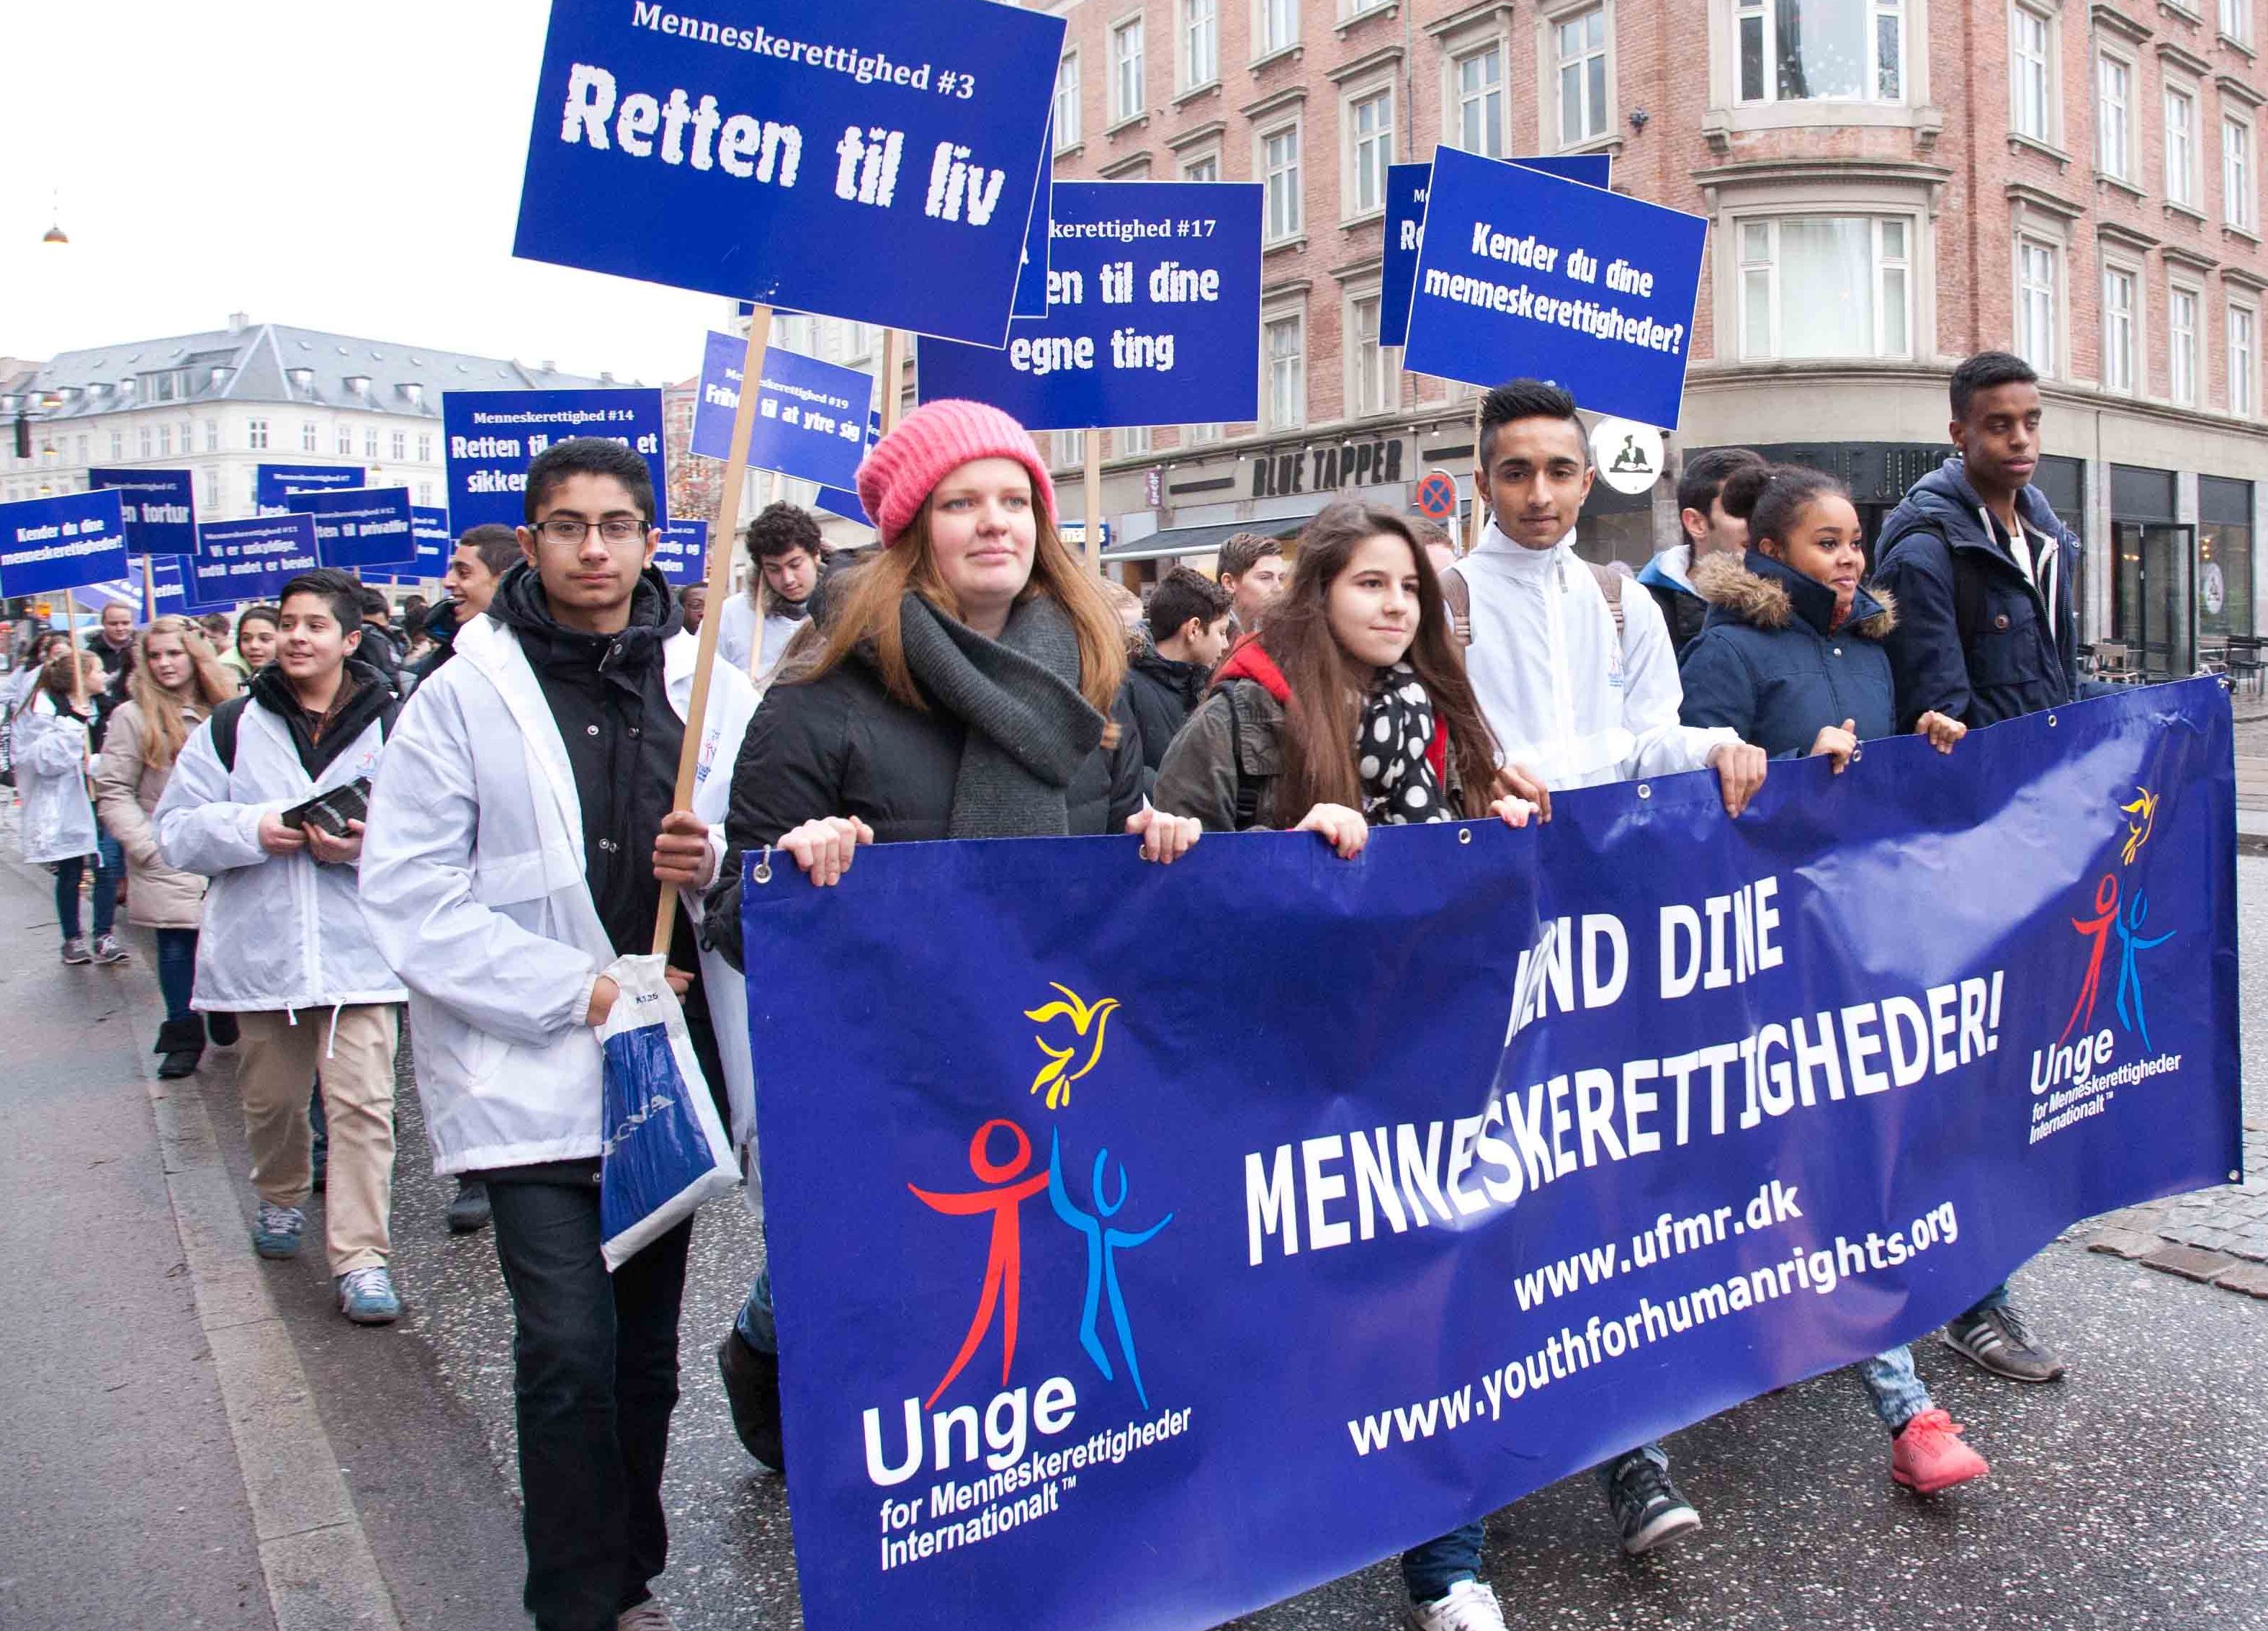 Copenhagen youth joined in the city’s fifth annual Walk for Human Rights in December 2013 to celebrate the 65th anniversary of the Universal Declaration on Human Rights